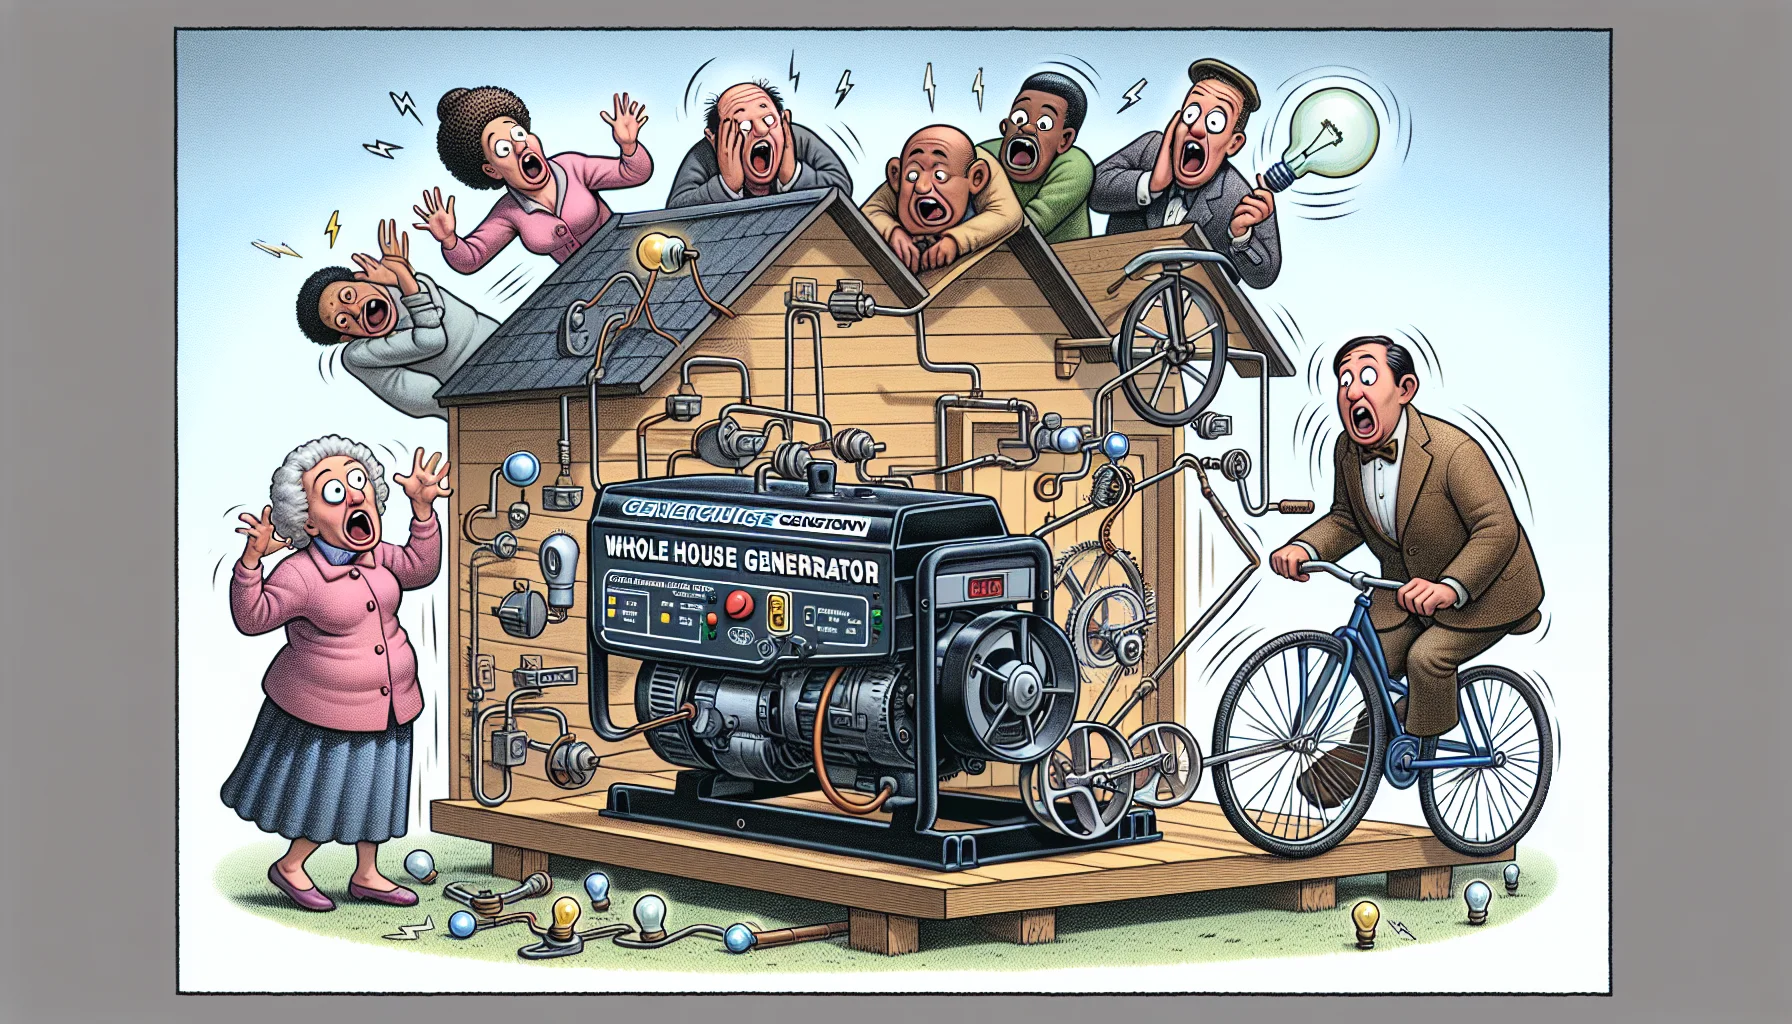 Visualize a humorous situation where a 'Whole House Generator', which is not linked to any specific brand, is shown in a central position. A group of diverse characters (including an elderly Caucasian woman, a young Hispanic man, and a middle-aged Black woman) are amusingly attempting to generate electricity the old-fashioned way. They have concocted a funny, convoluted Rube Goldberg machine, involving a bicycle, a hamster wheel, and an array of light bulbs. In contrast, someone just pushes a button on the generator, it starts smoothly, and they all look shockingly amazed, drawing emphasis to the generator's convenience and power.